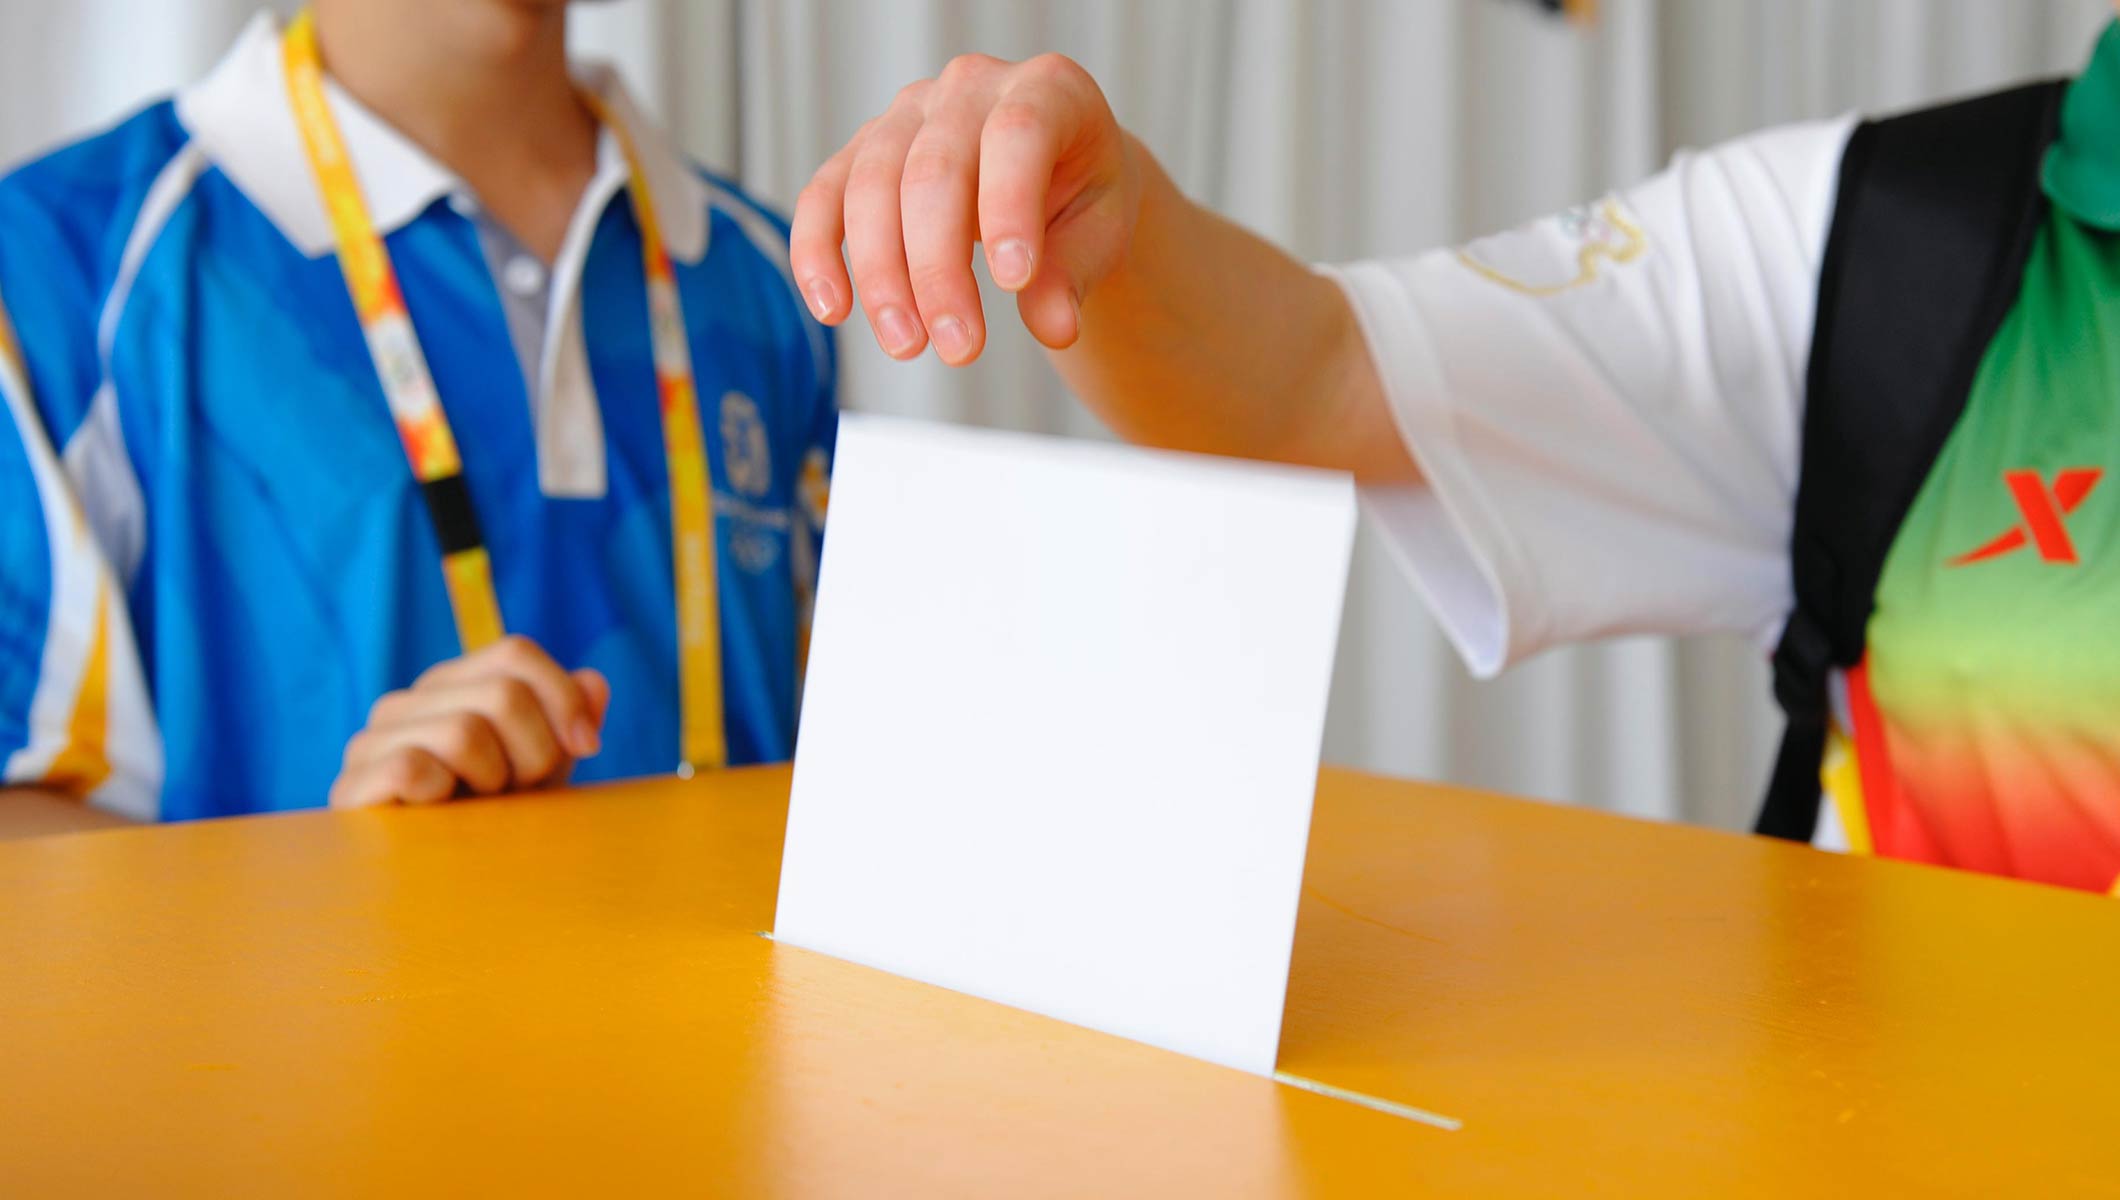 Six candidates approved for IOC Athletes’ Commission elections in